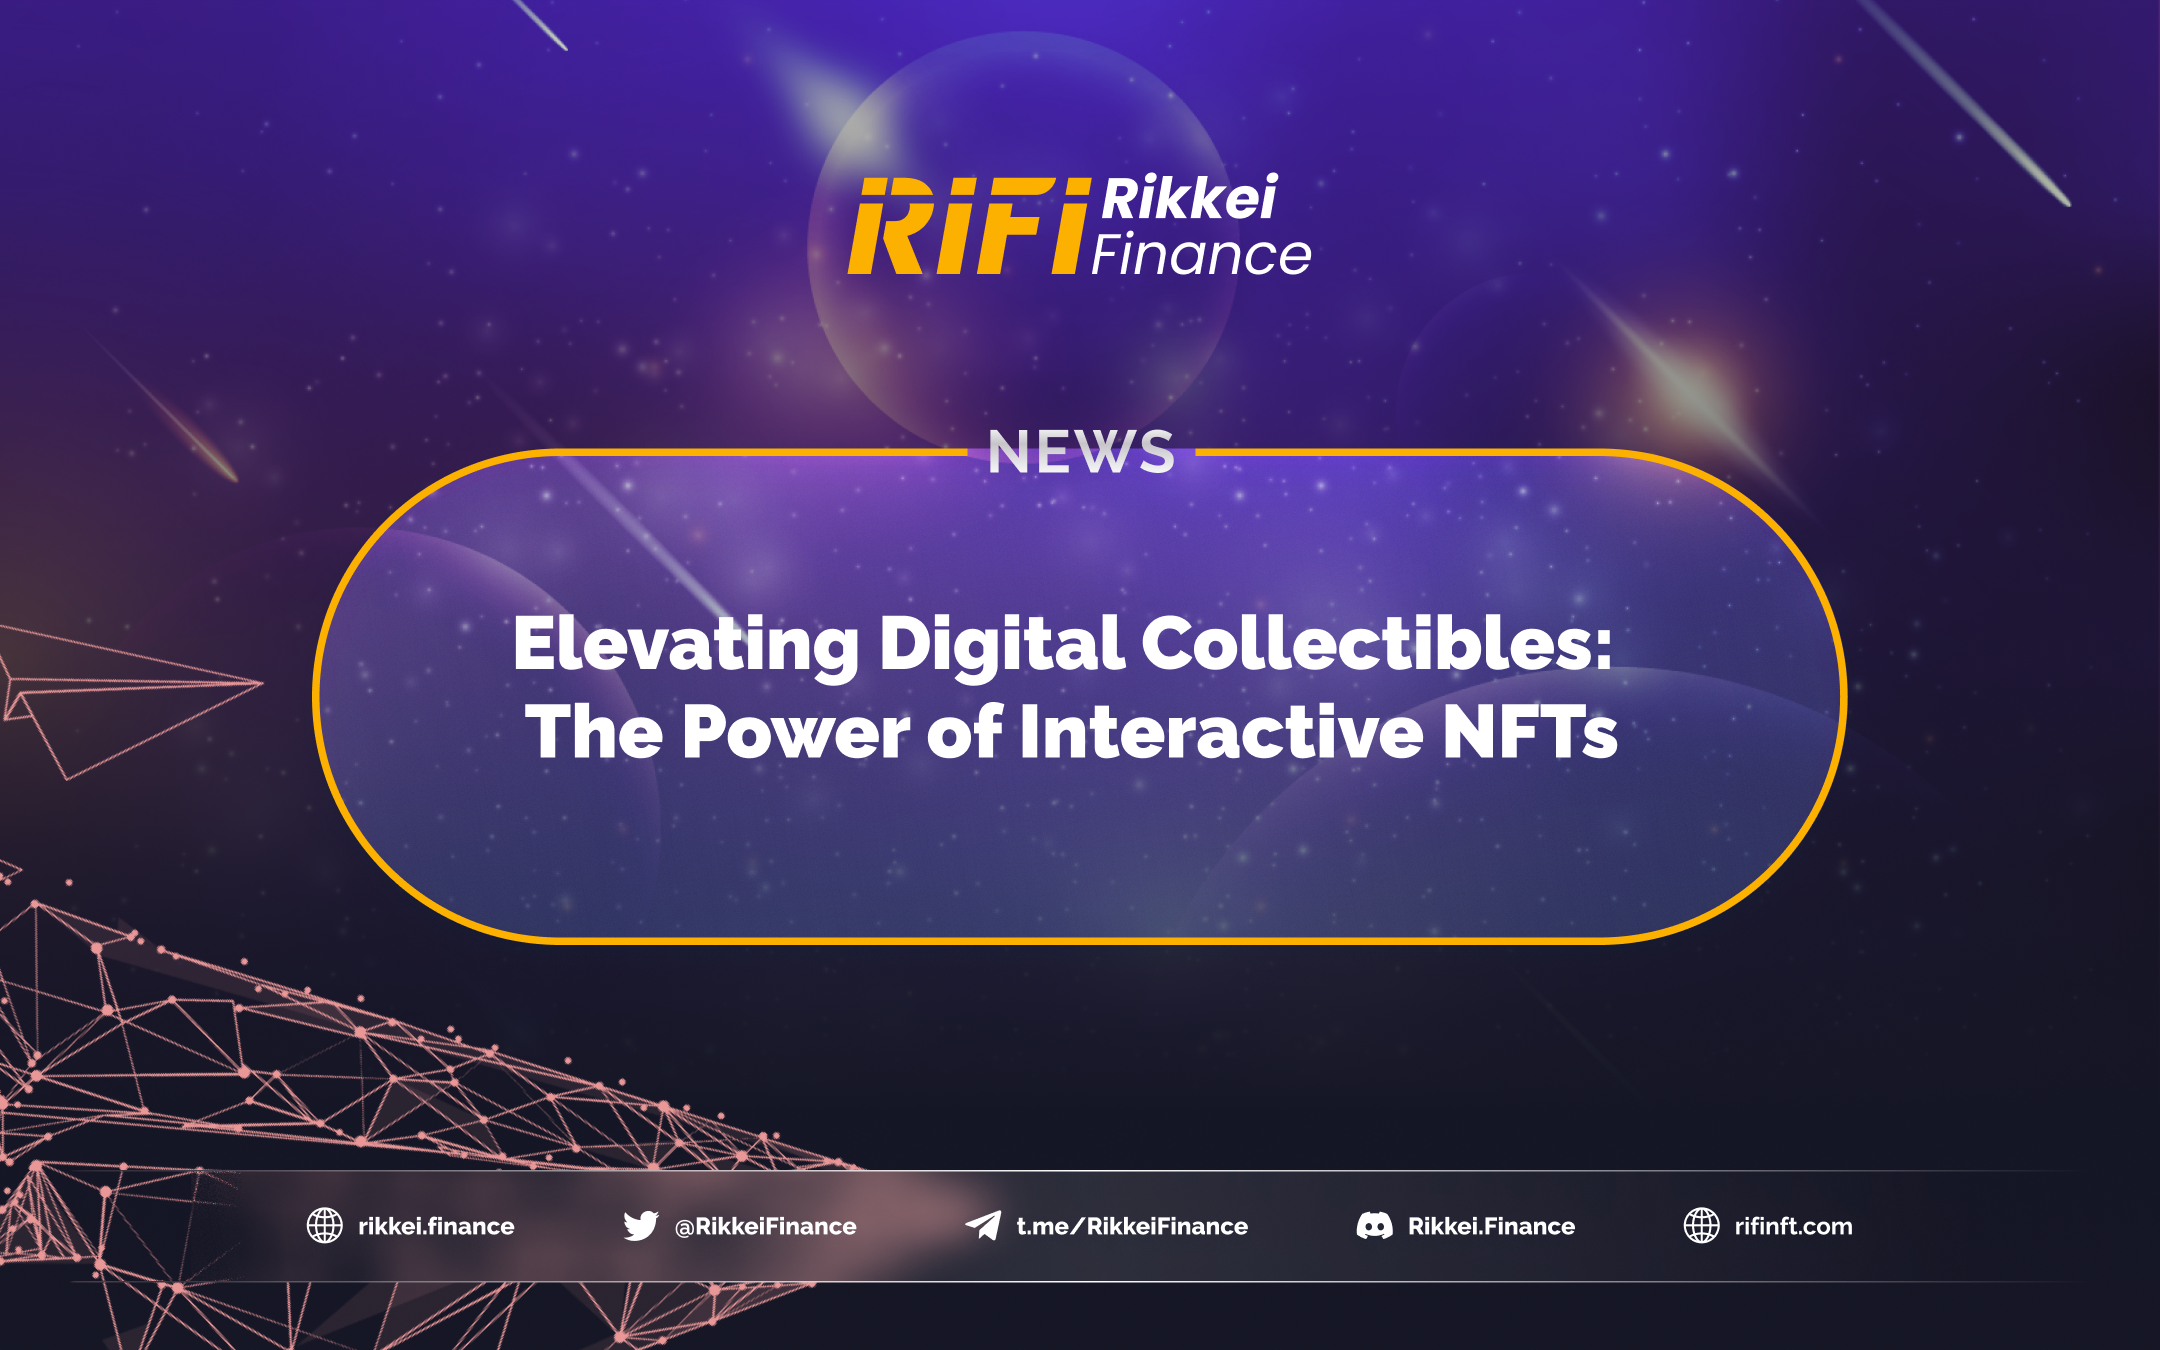 Elevating Digital Collectibles: The Power of Interactive NFTs